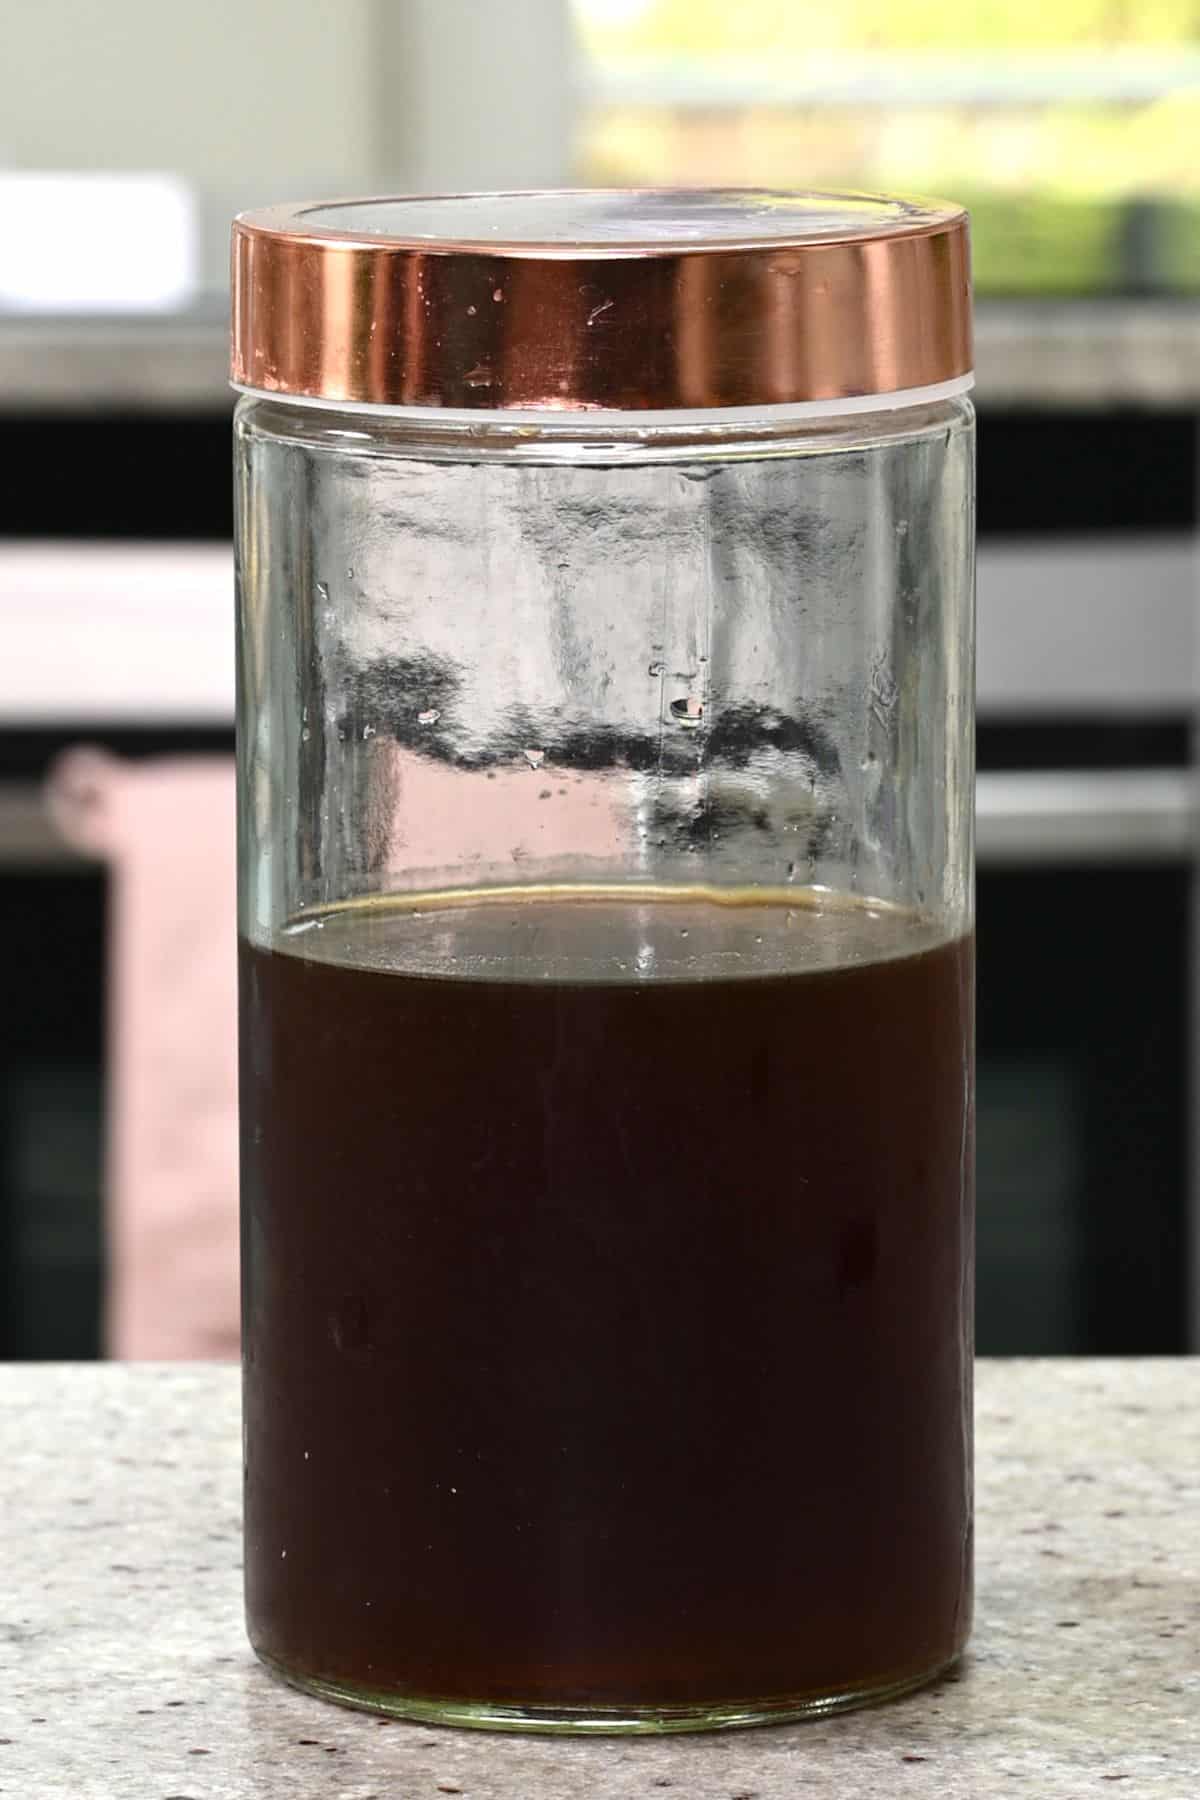 https://www.alphafoodie.com/wp-content/uploads/2022/07/Cold-Brew-Coffee-A-glass-container-with-cold-brew-coffee-concentrate.jpeg